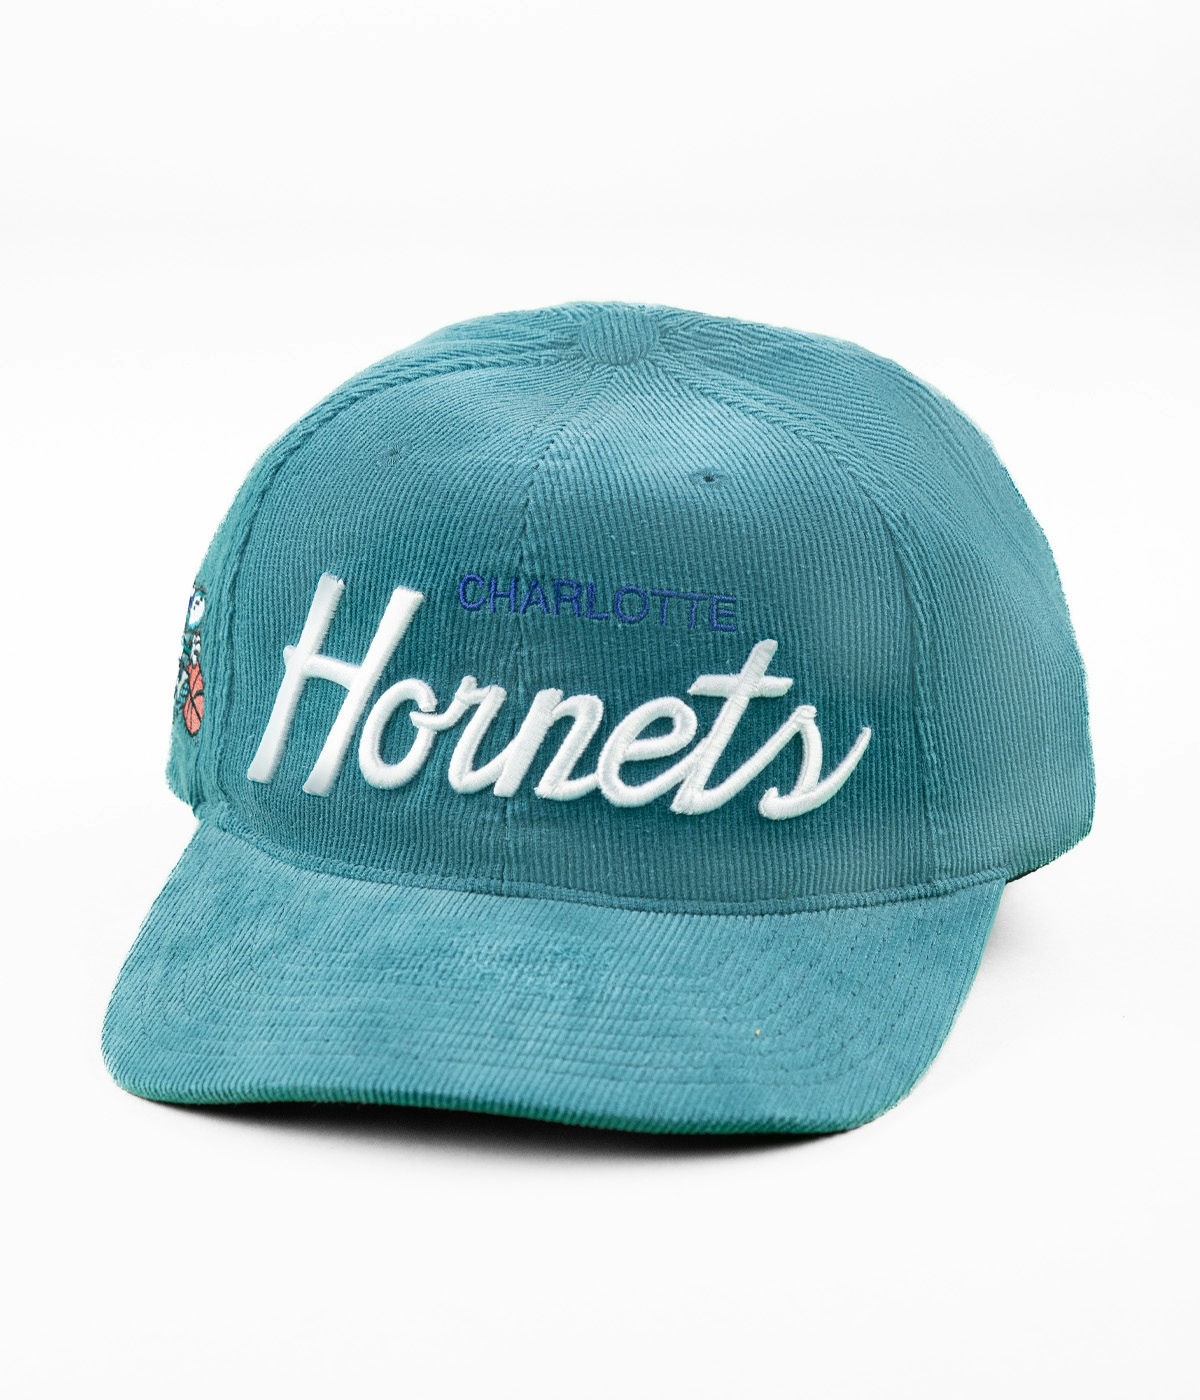 Mitchell & Ness Montage Cord Snapback - Charlotte Hornets Cap Teal 1